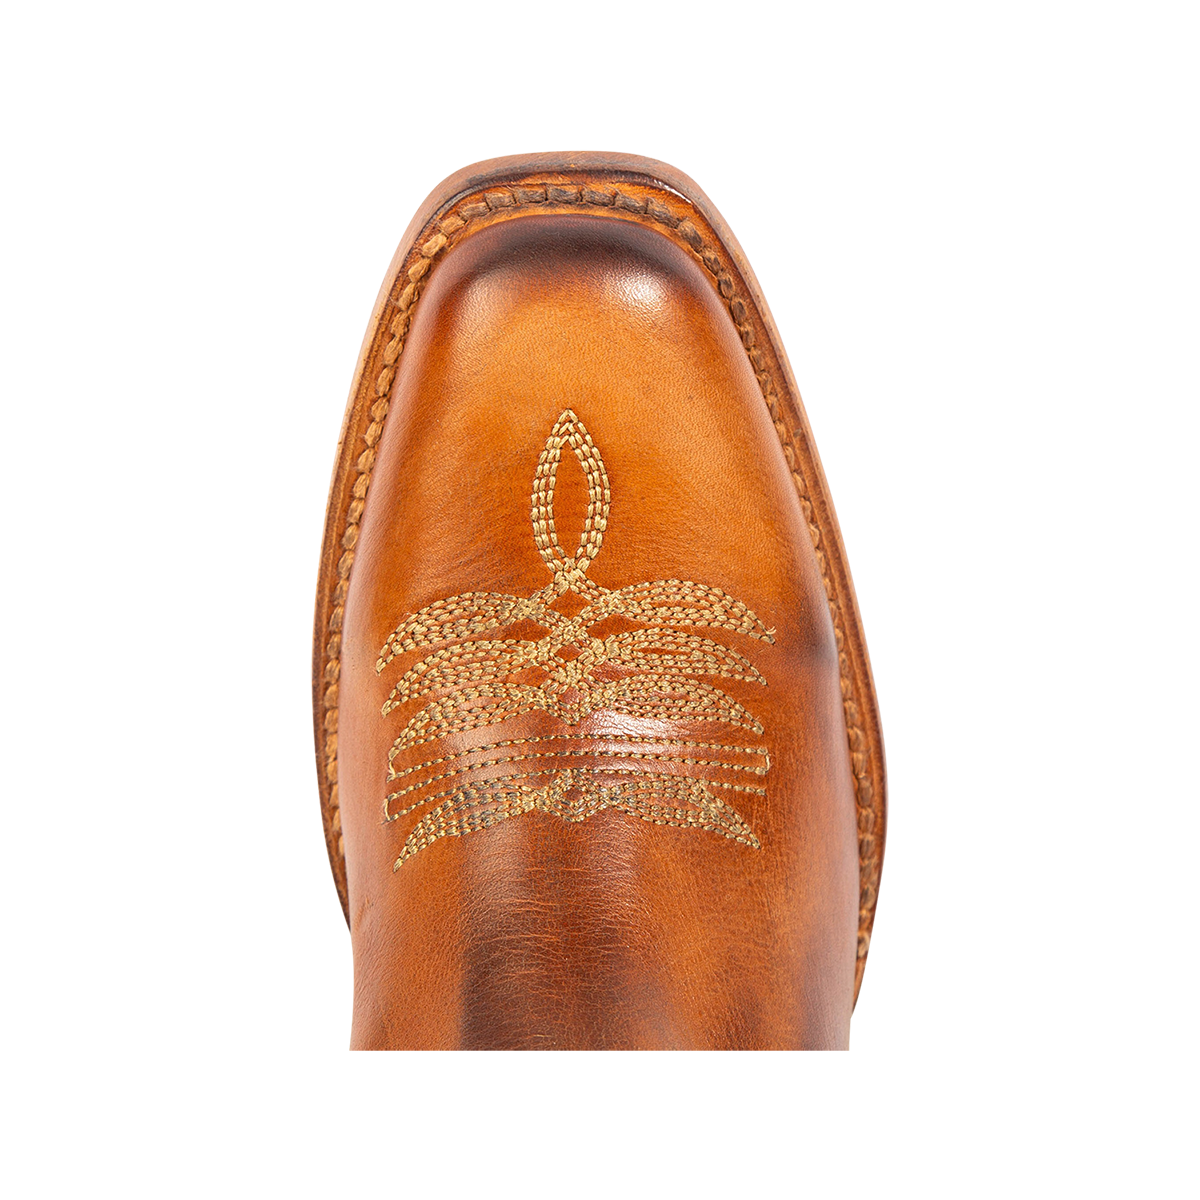 Top view showing a square toe and stitch detailing on FREEBIRD women's Panama whiskey leather boot 